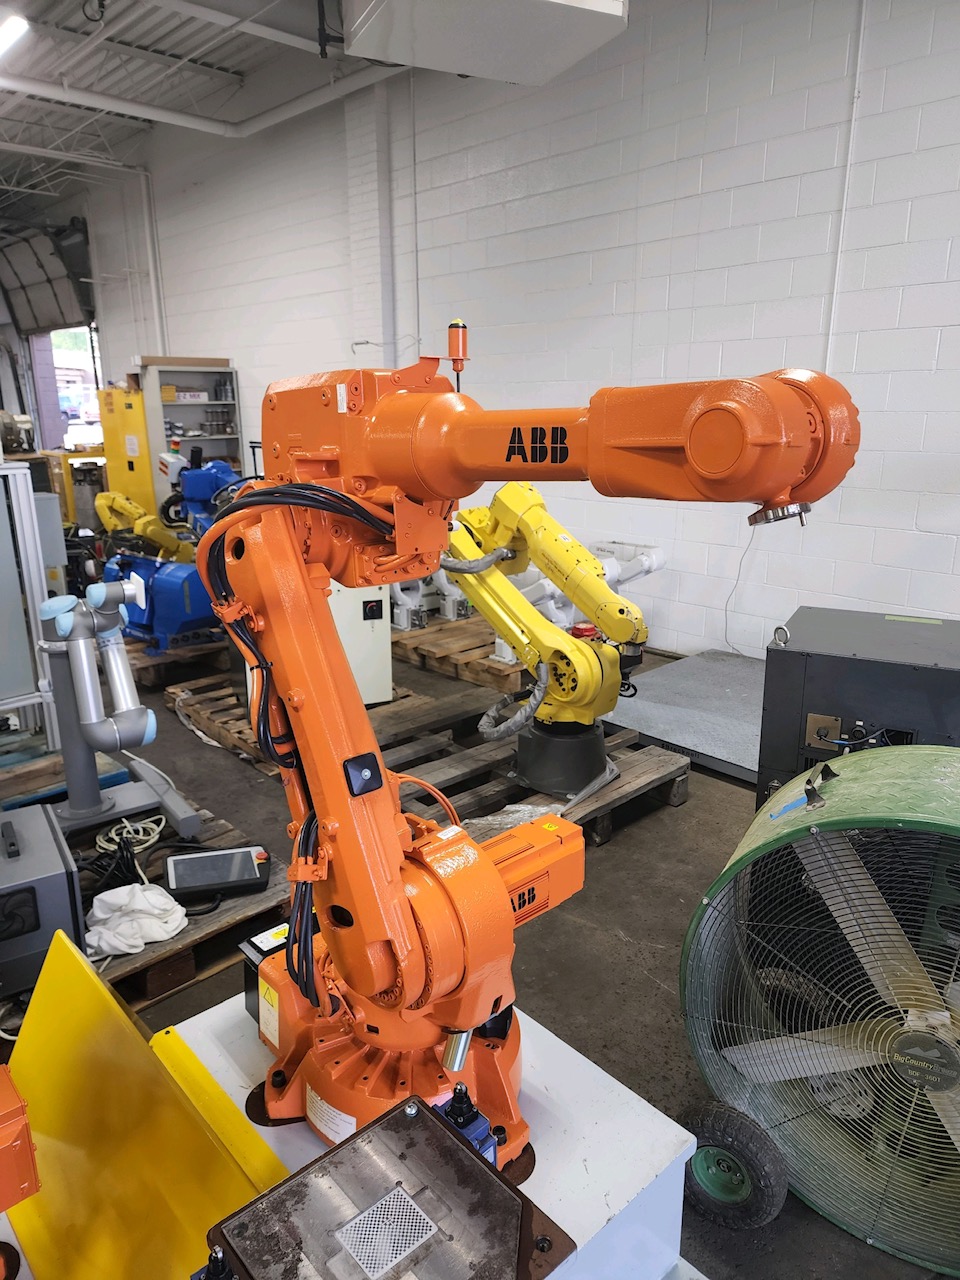 Why Consider a Used ABB Robot Over a New One